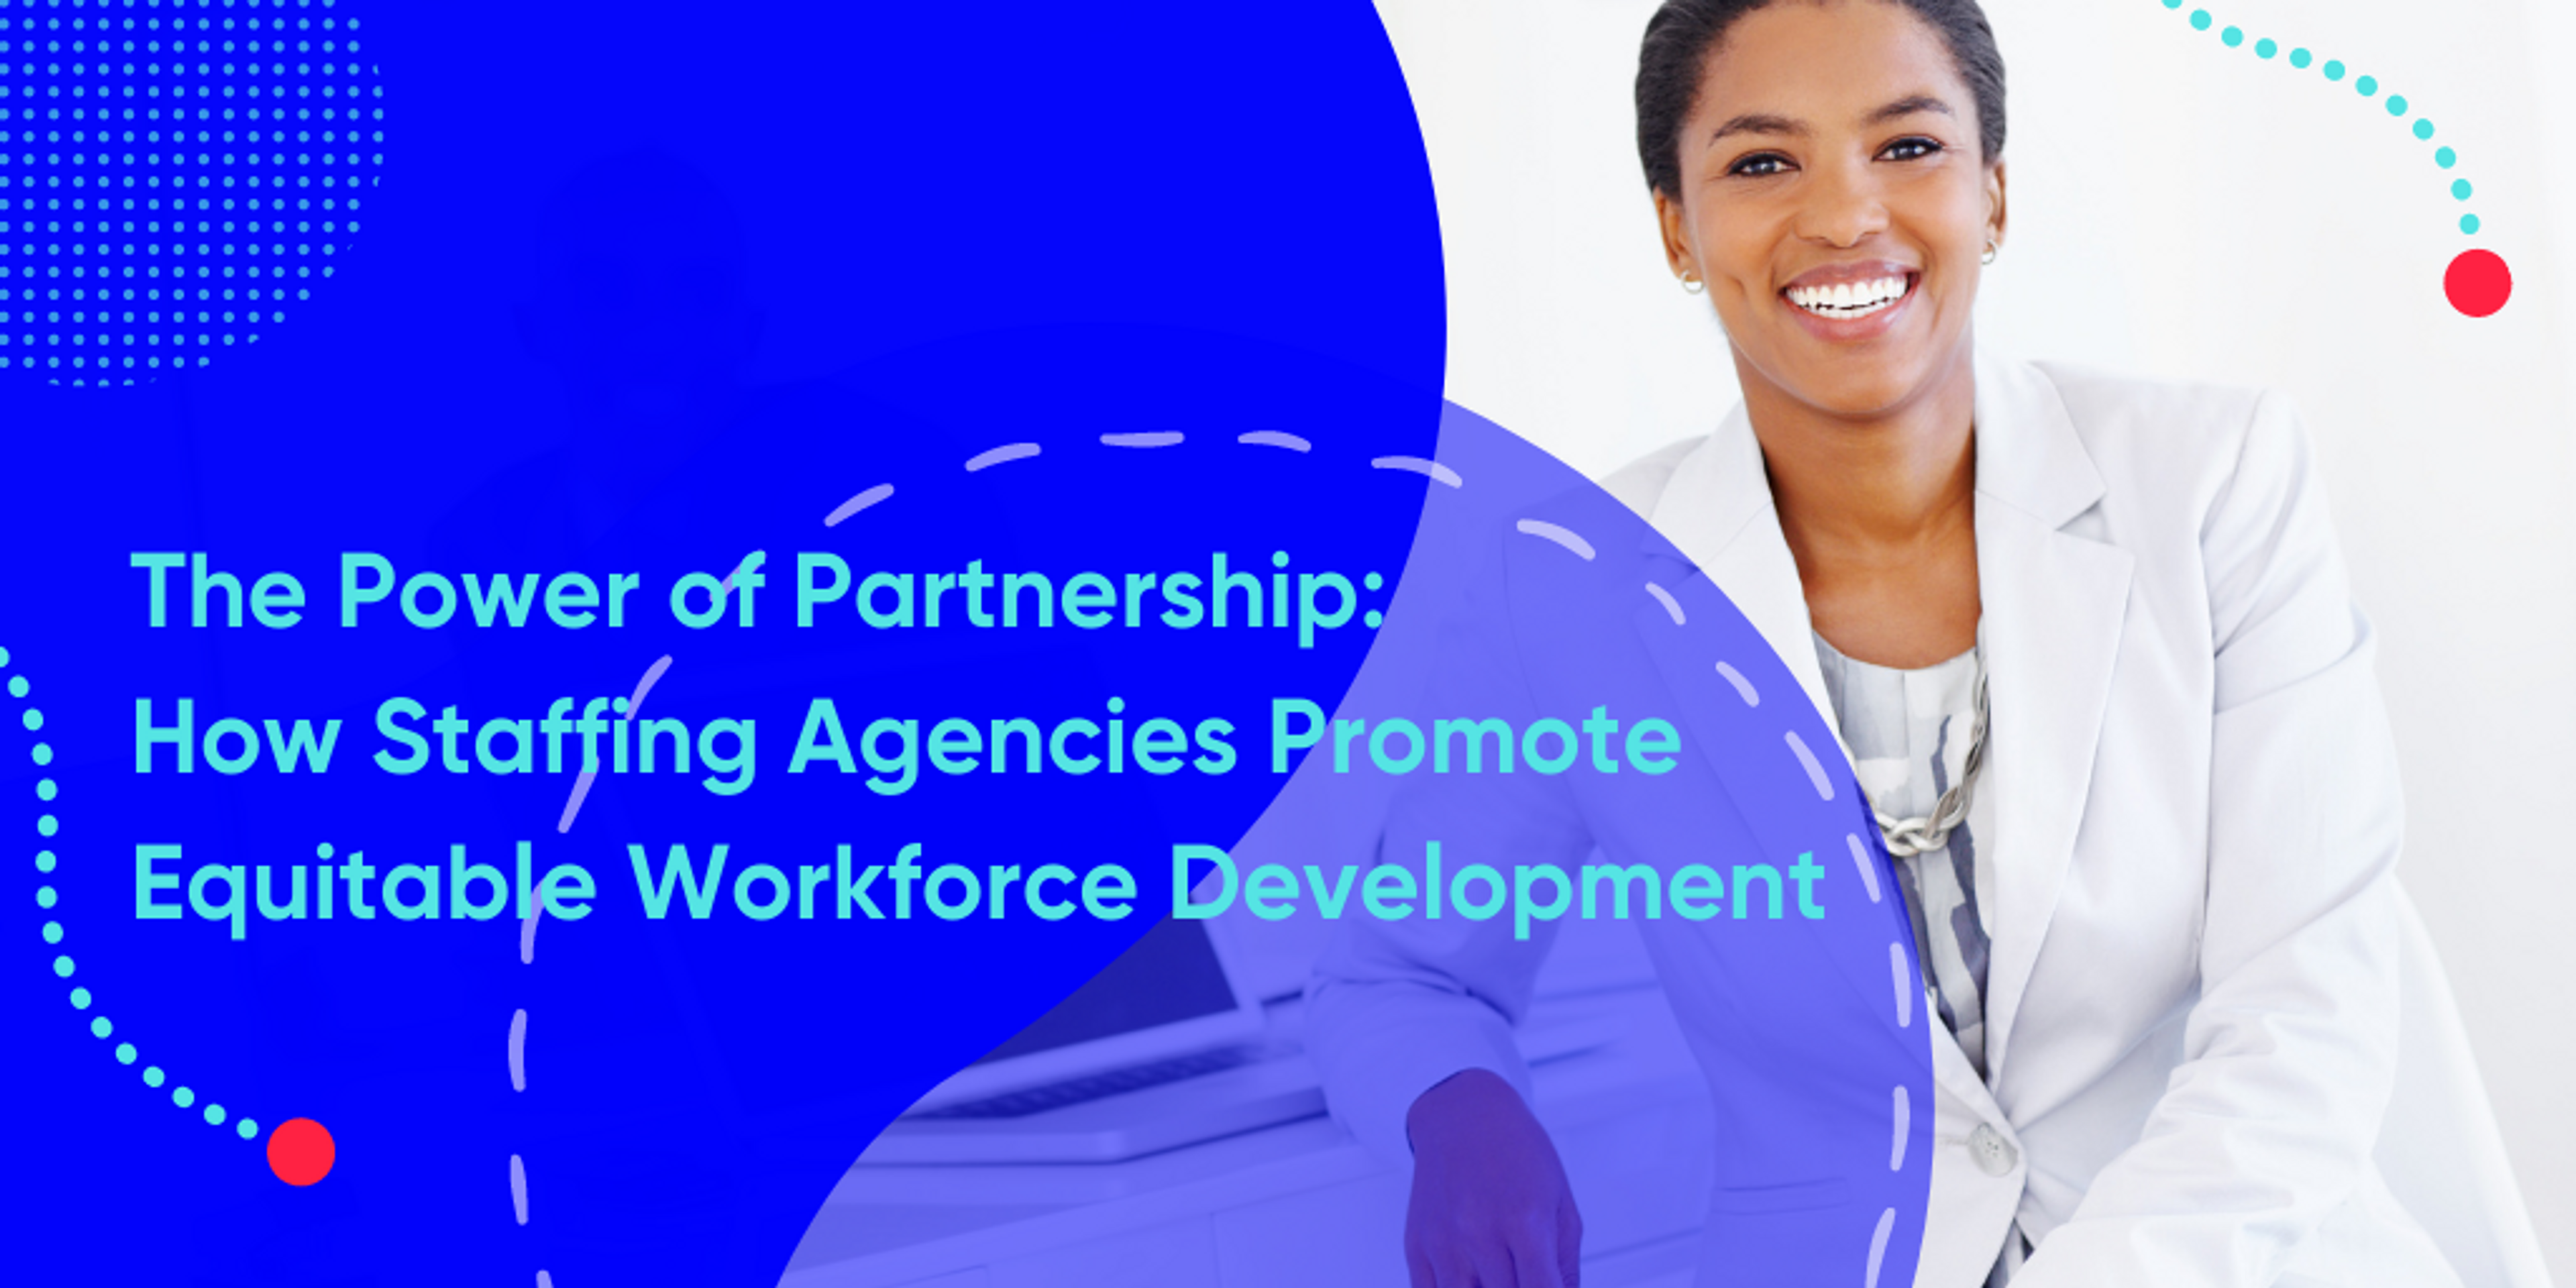 Image of woman smiling with text "The Power of Partnership: How Staffing Agencies Promote Equitable Workforce Development"